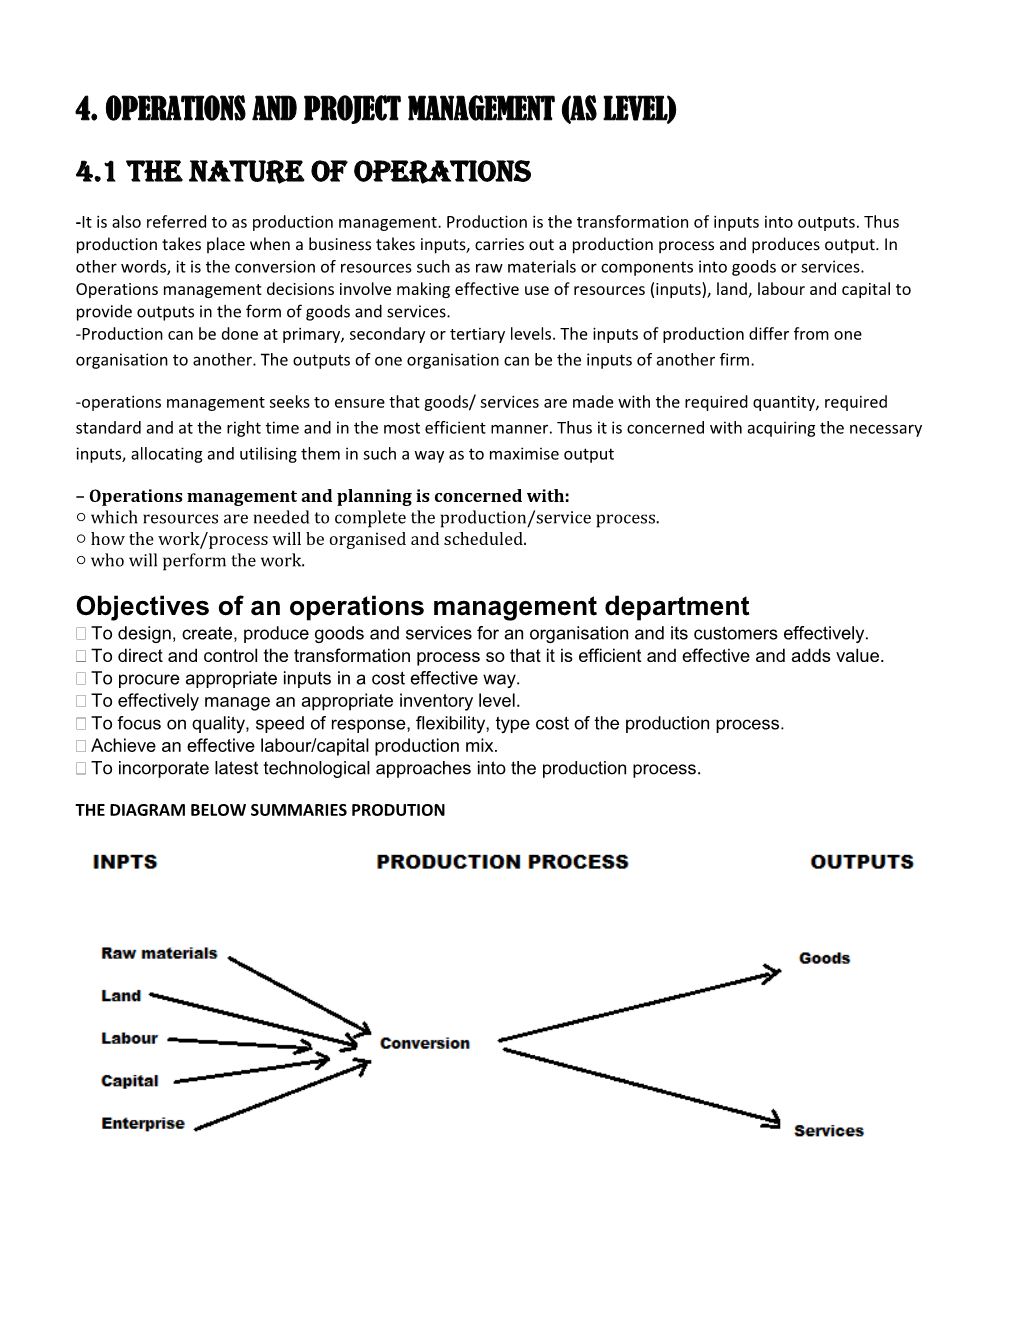 4. Operations and Project Management (As Level)